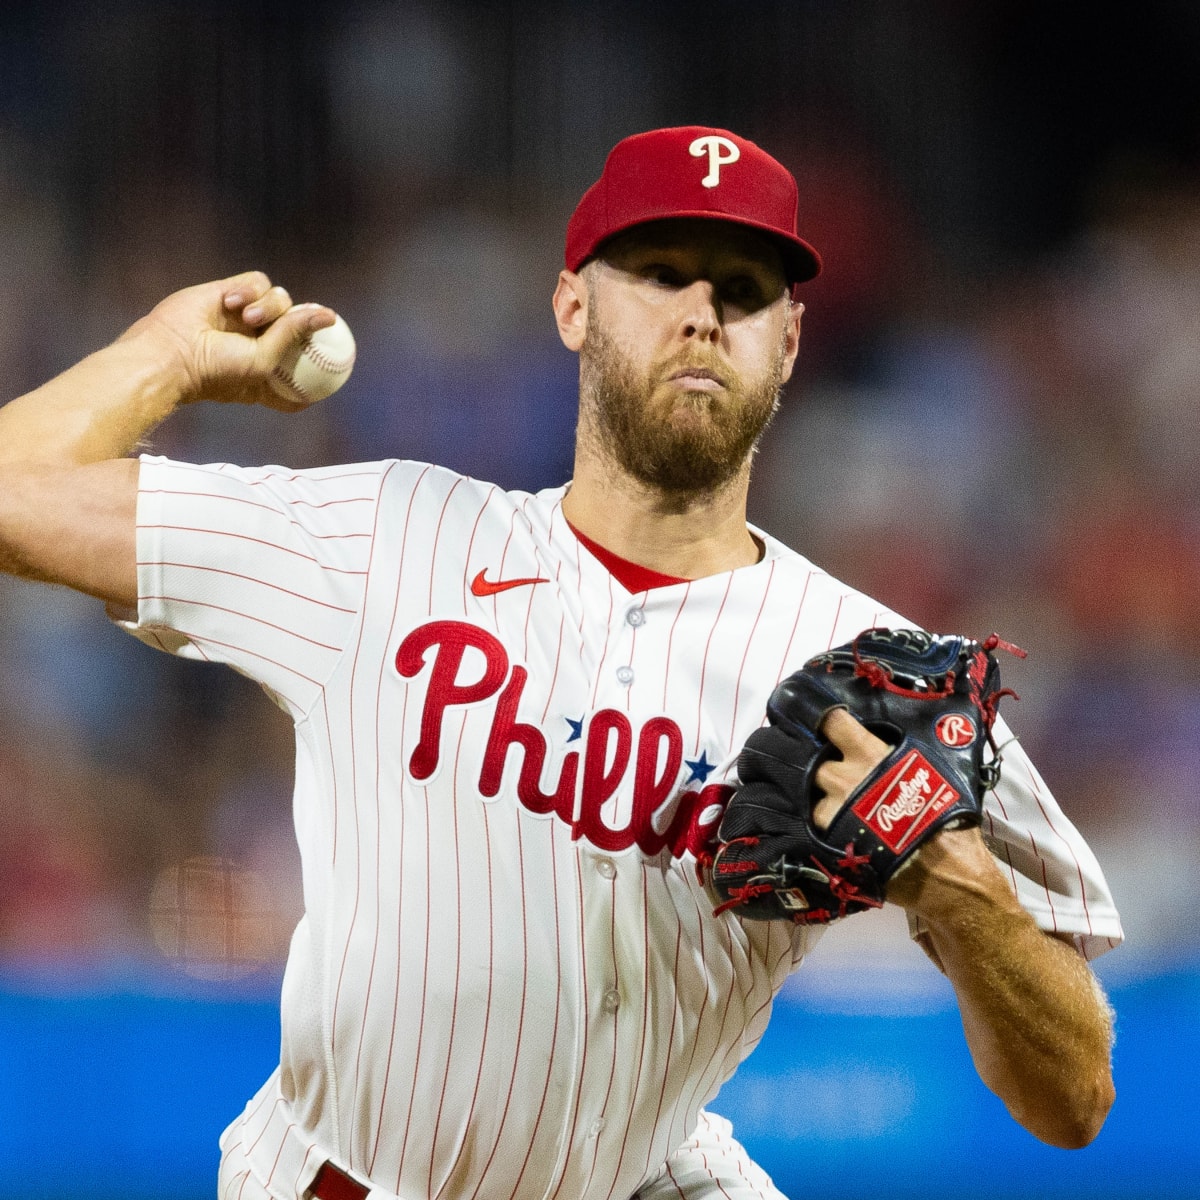 Phillies Game 5 pitcher Zack Wheeler would like more leeway for